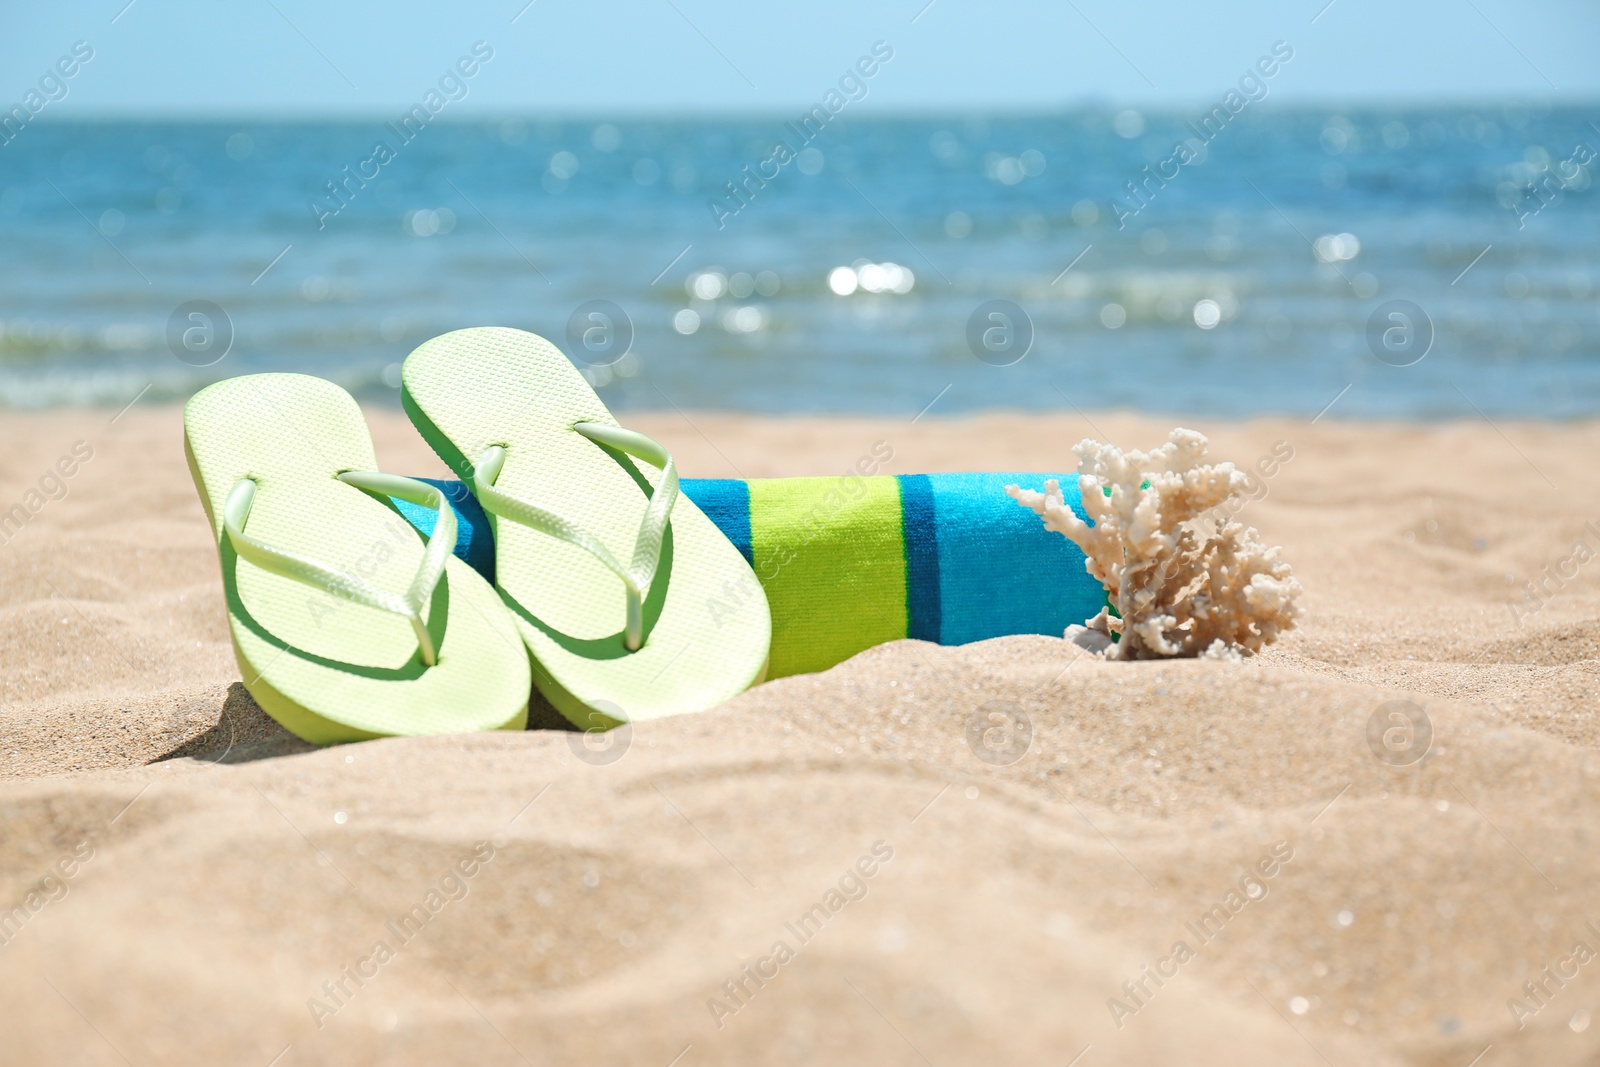 Photo of Set of different beach objects on sand near sea